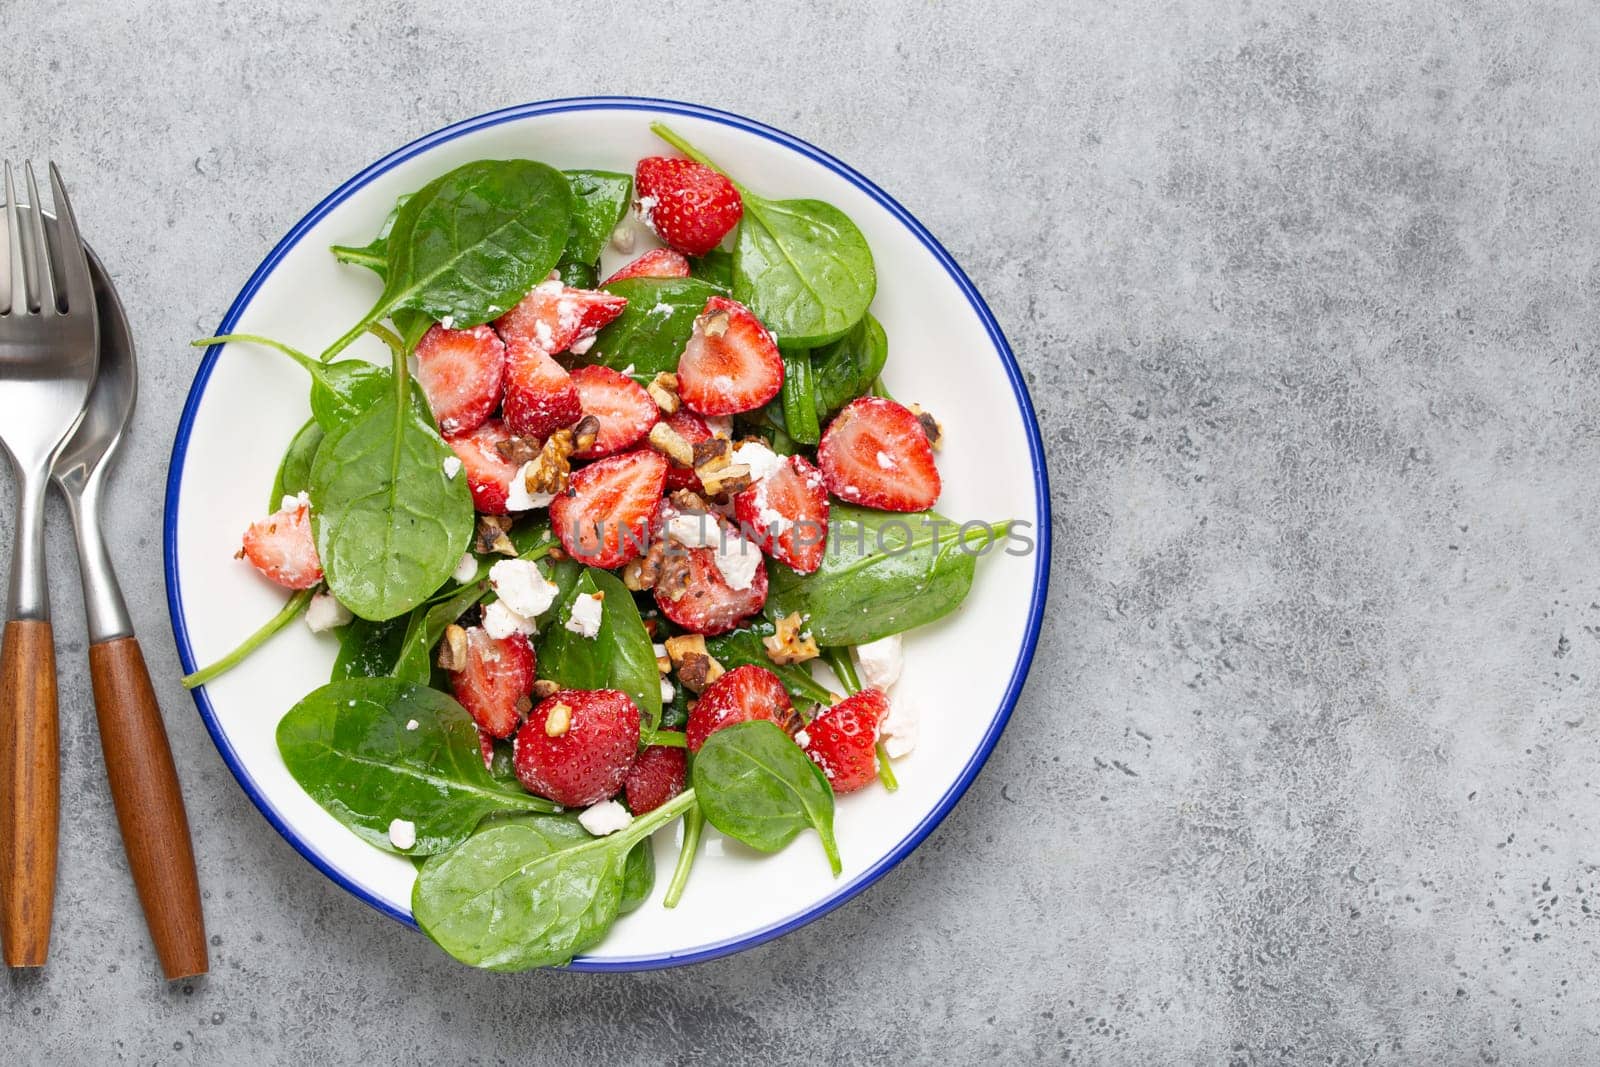 Light Healthy Summer Salad with fresh Strawberries, Spinach, Cream Cheese and Walnuts on White Ceramic Plate, Grey rustic stone Background Top View Copy Space.